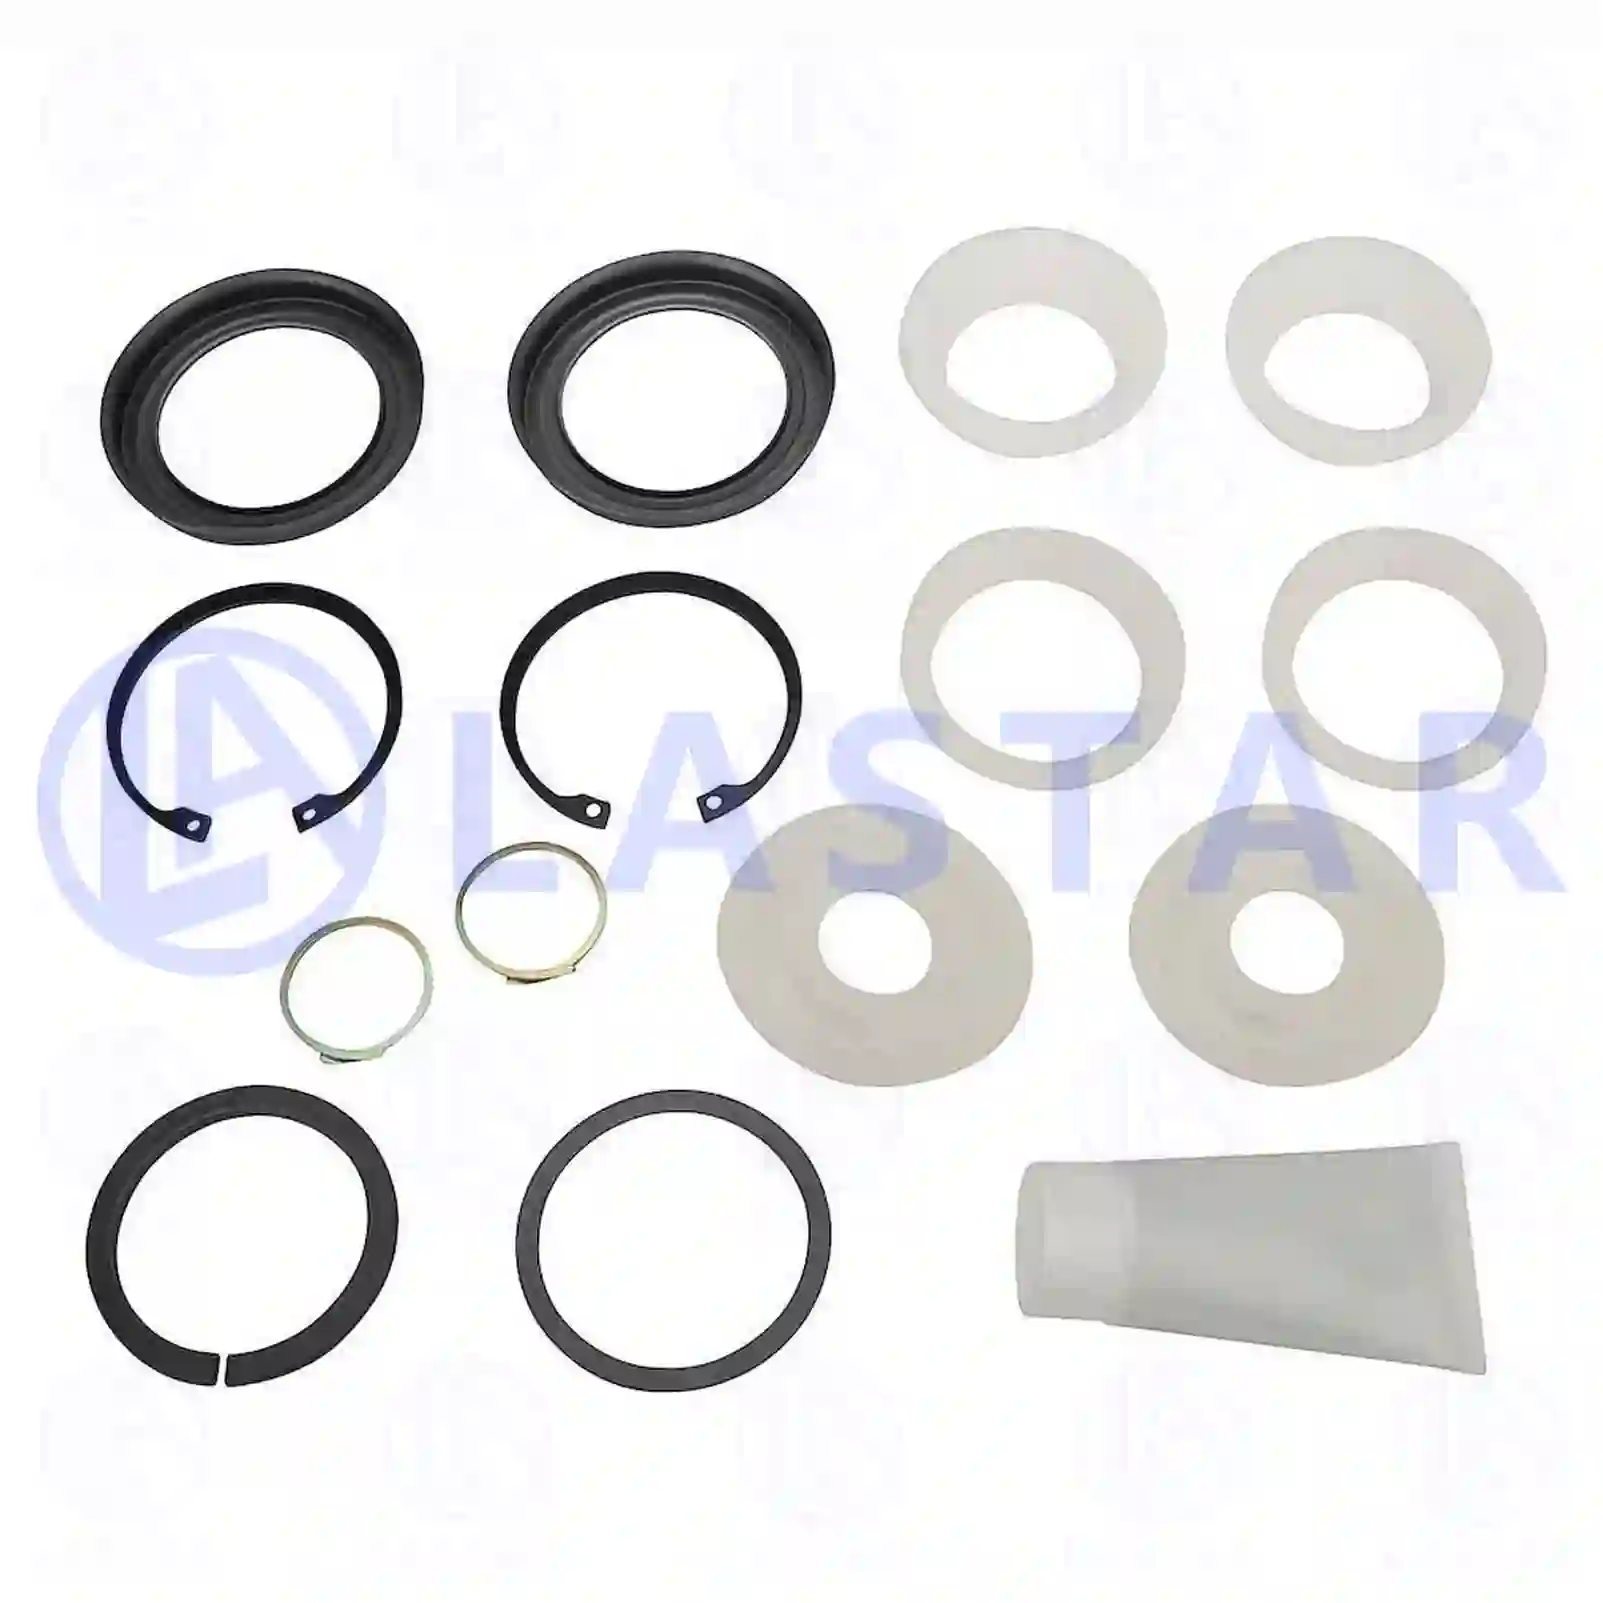 Repair kit, v-stay, 77728420, 5861533, 50008194 ||  77728420 Lastar Spare Part | Truck Spare Parts, Auotomotive Spare Parts Repair kit, v-stay, 77728420, 5861533, 50008194 ||  77728420 Lastar Spare Part | Truck Spare Parts, Auotomotive Spare Parts